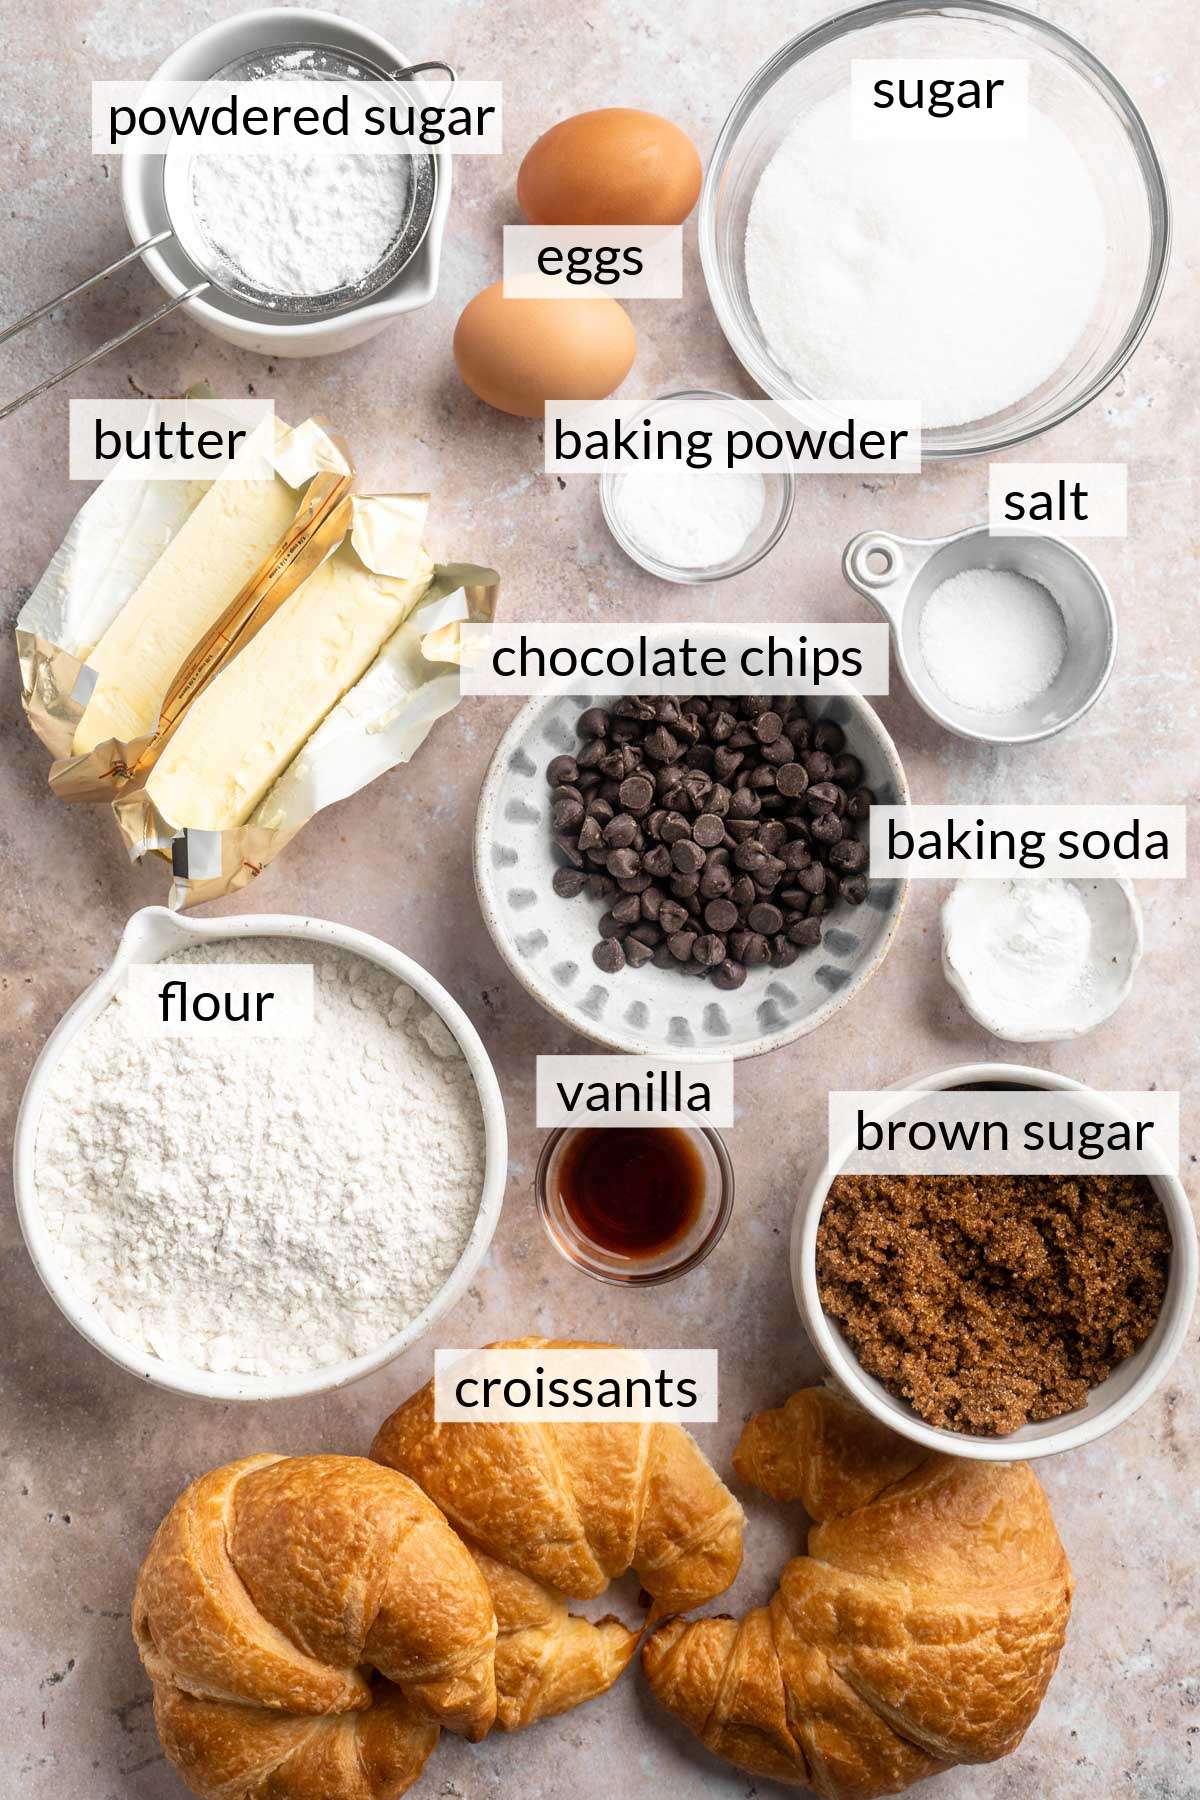 Croissants, butter, flour, sugar, chocolate chips, eggs and powdered sugar divided into small portions.